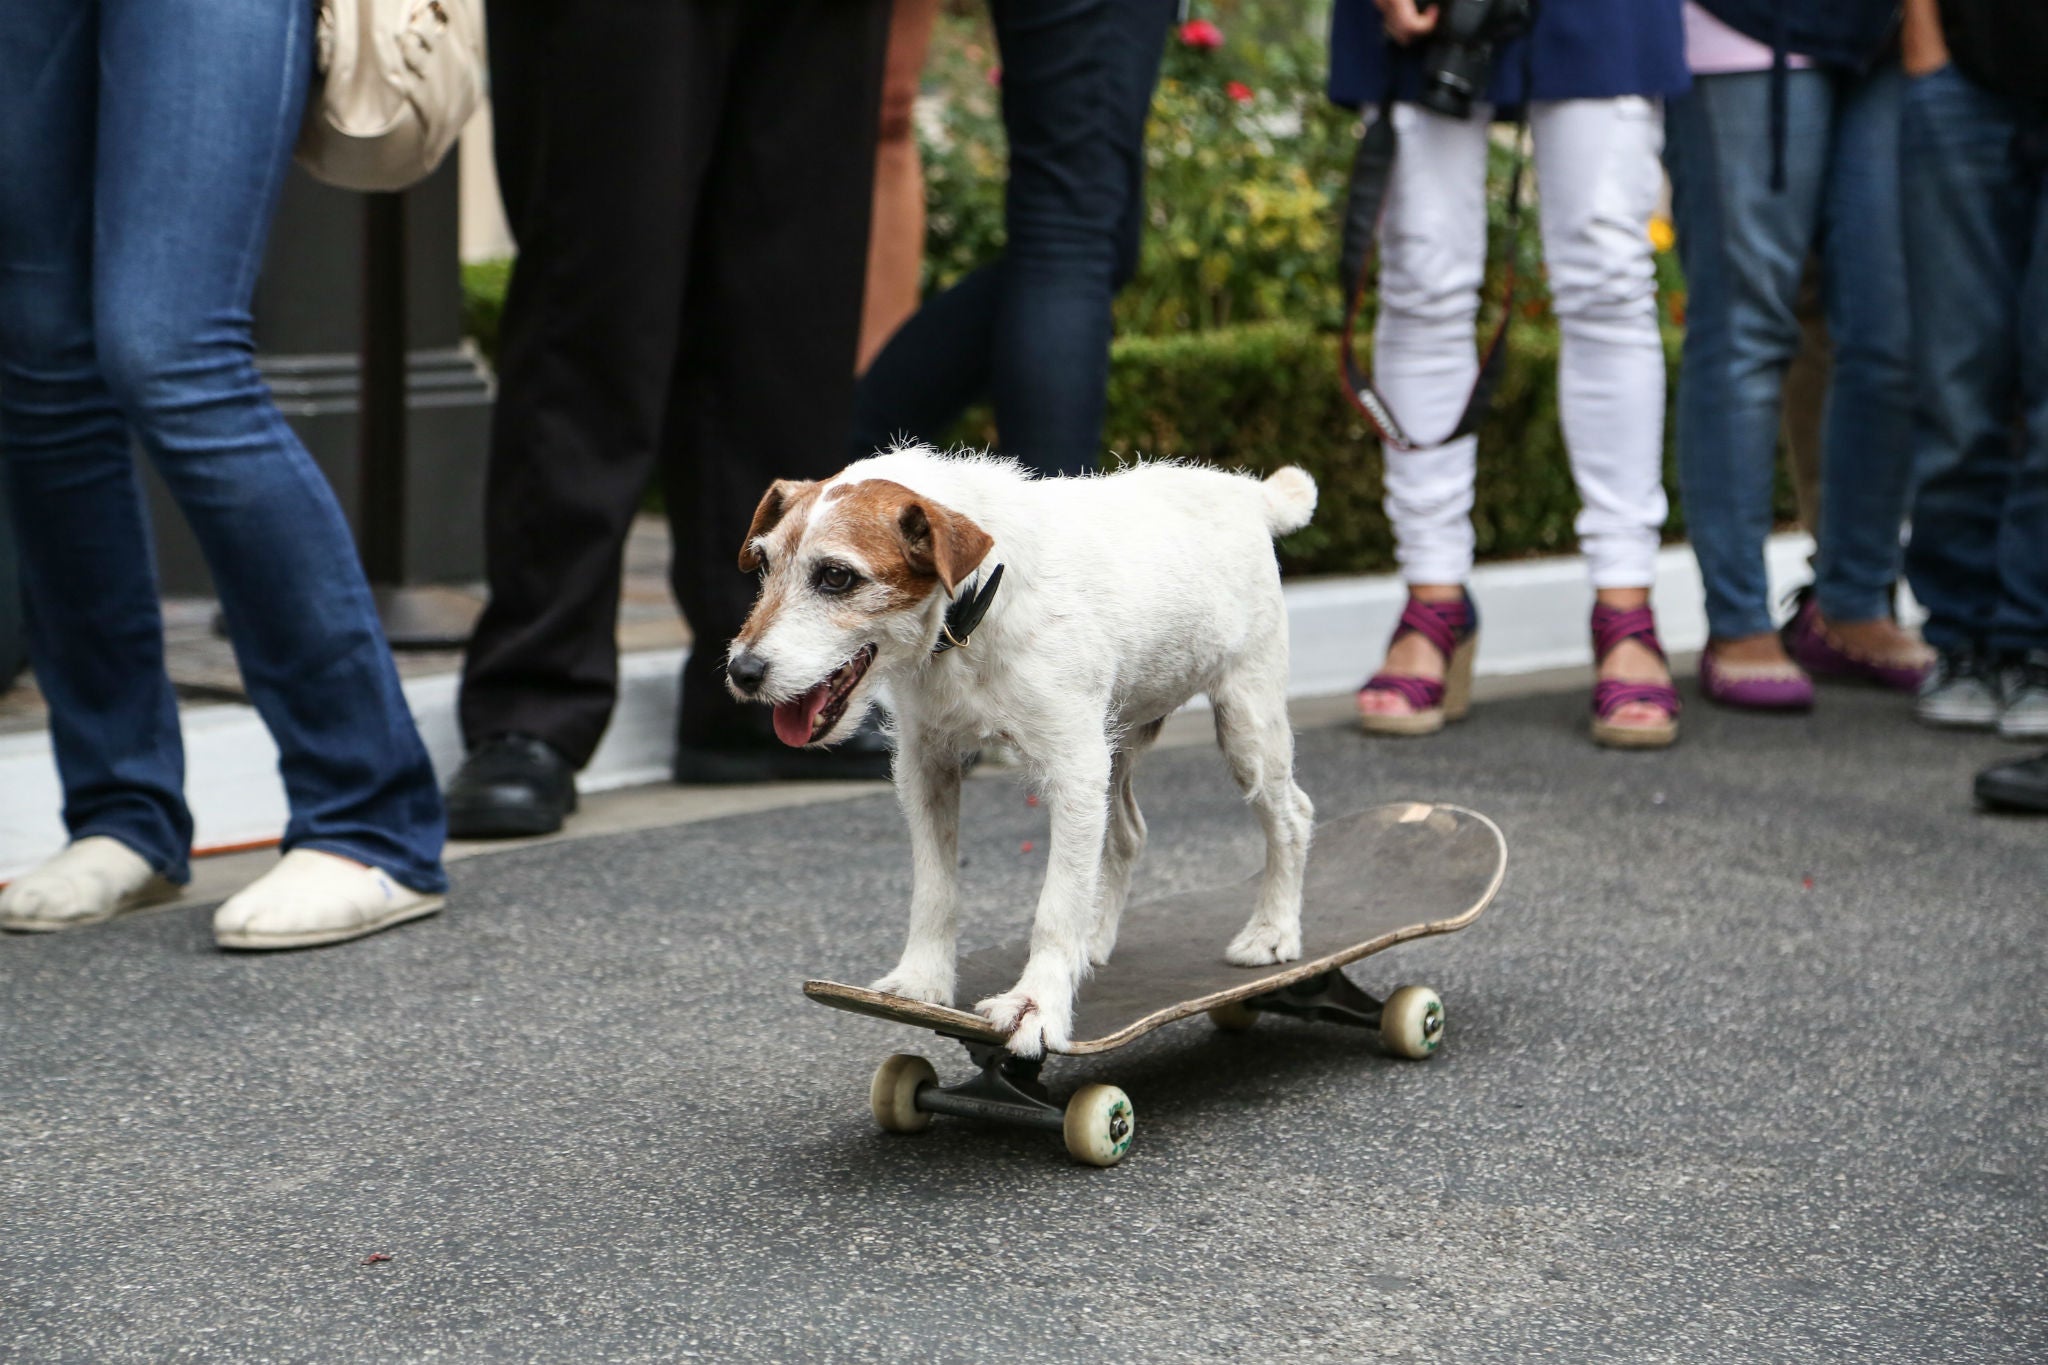 Uggie, the late star of The Artist and winner of the 2011 Palm Dog prize at Cannes. The LA Dog Film Festival does not yet include full-length features.